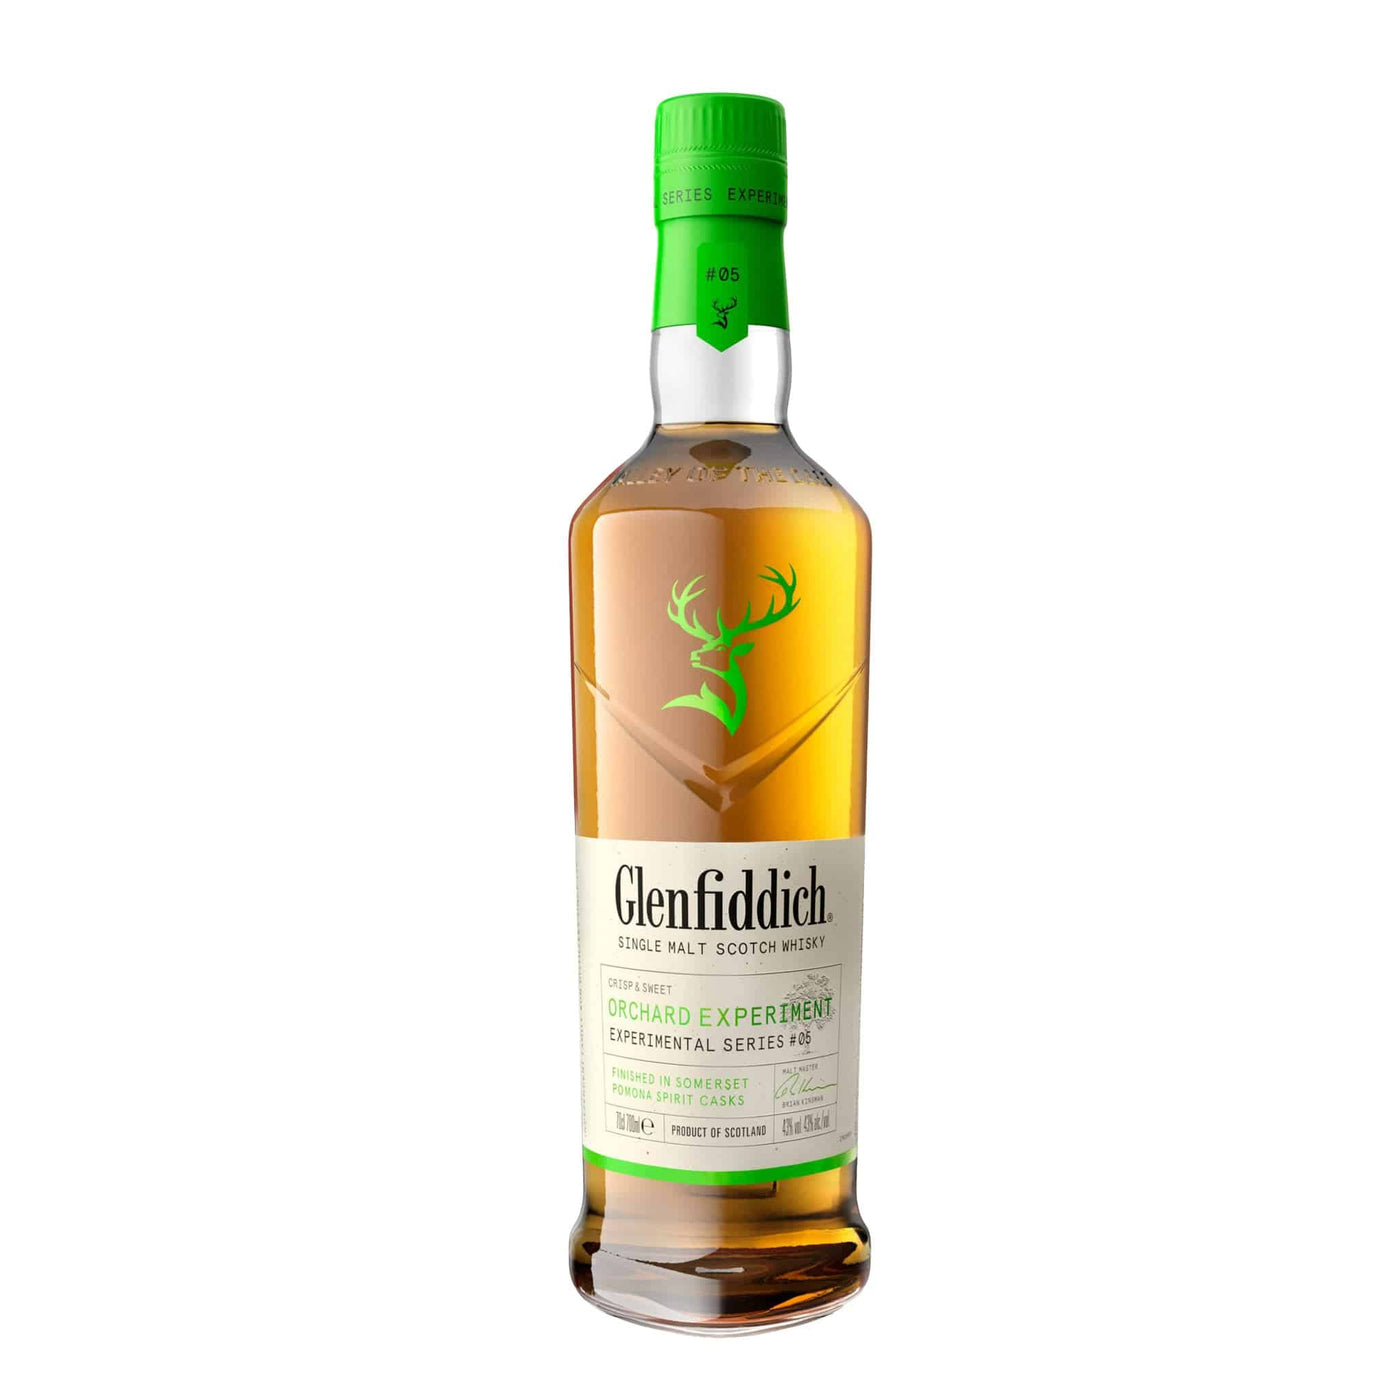 Glenfiddich Orchard Experiment Whisky